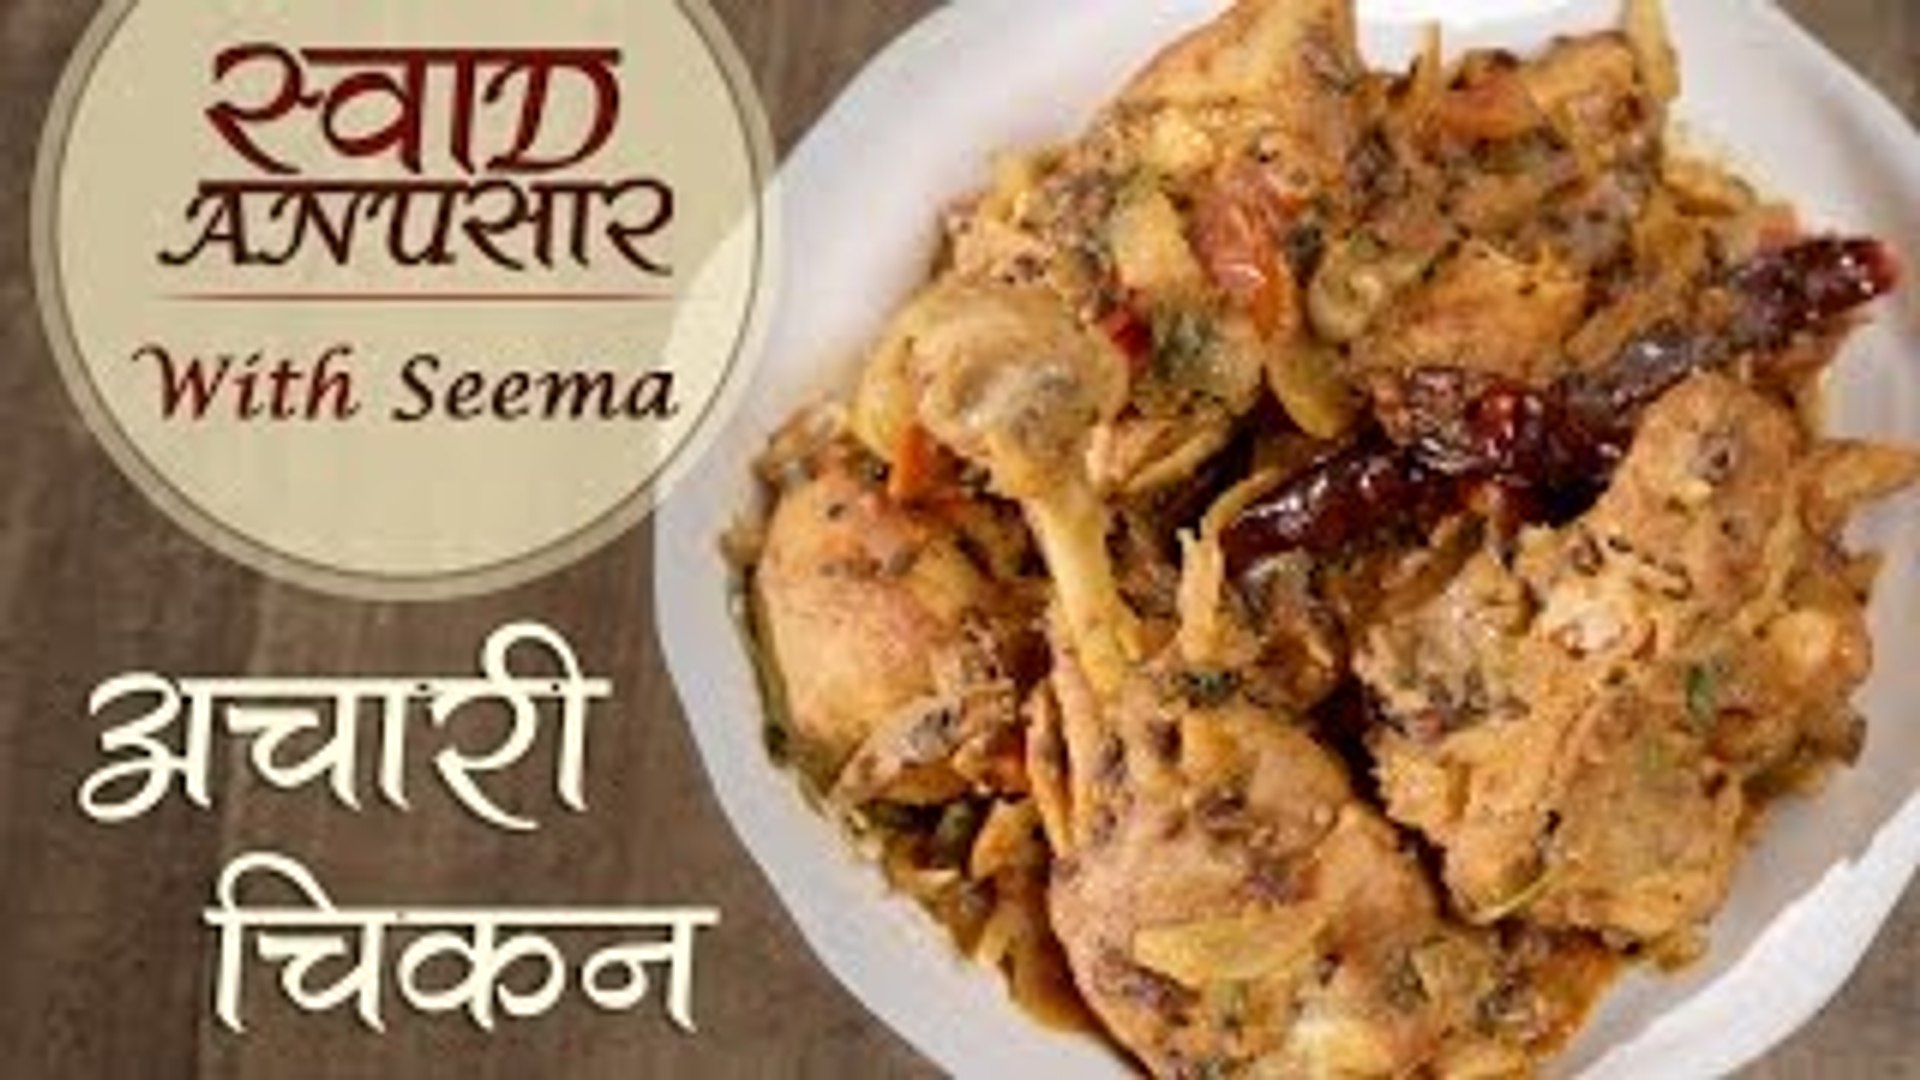 How To Make Achari Chicken Delicious Chicken Main Course Recipe Swaad Anusaar With Seema